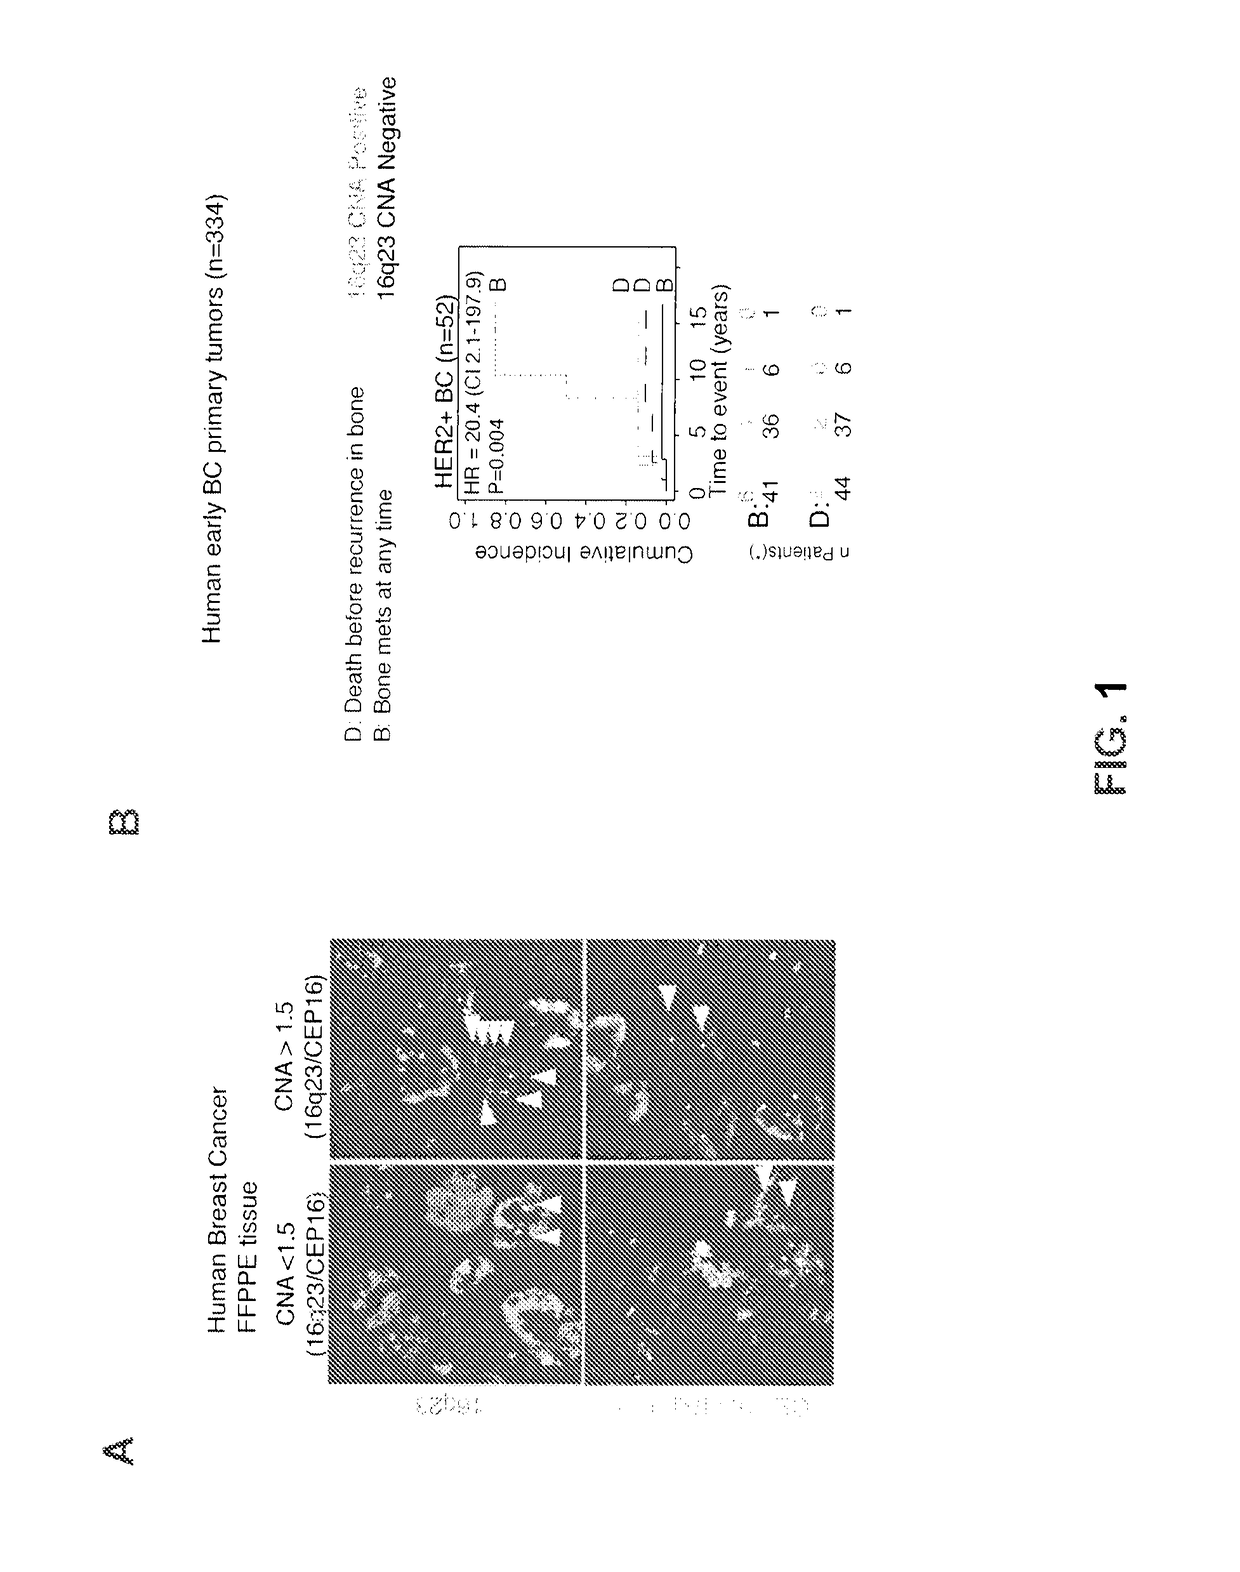 Method for the Prognosis and Treatment of Cancer Metastasis